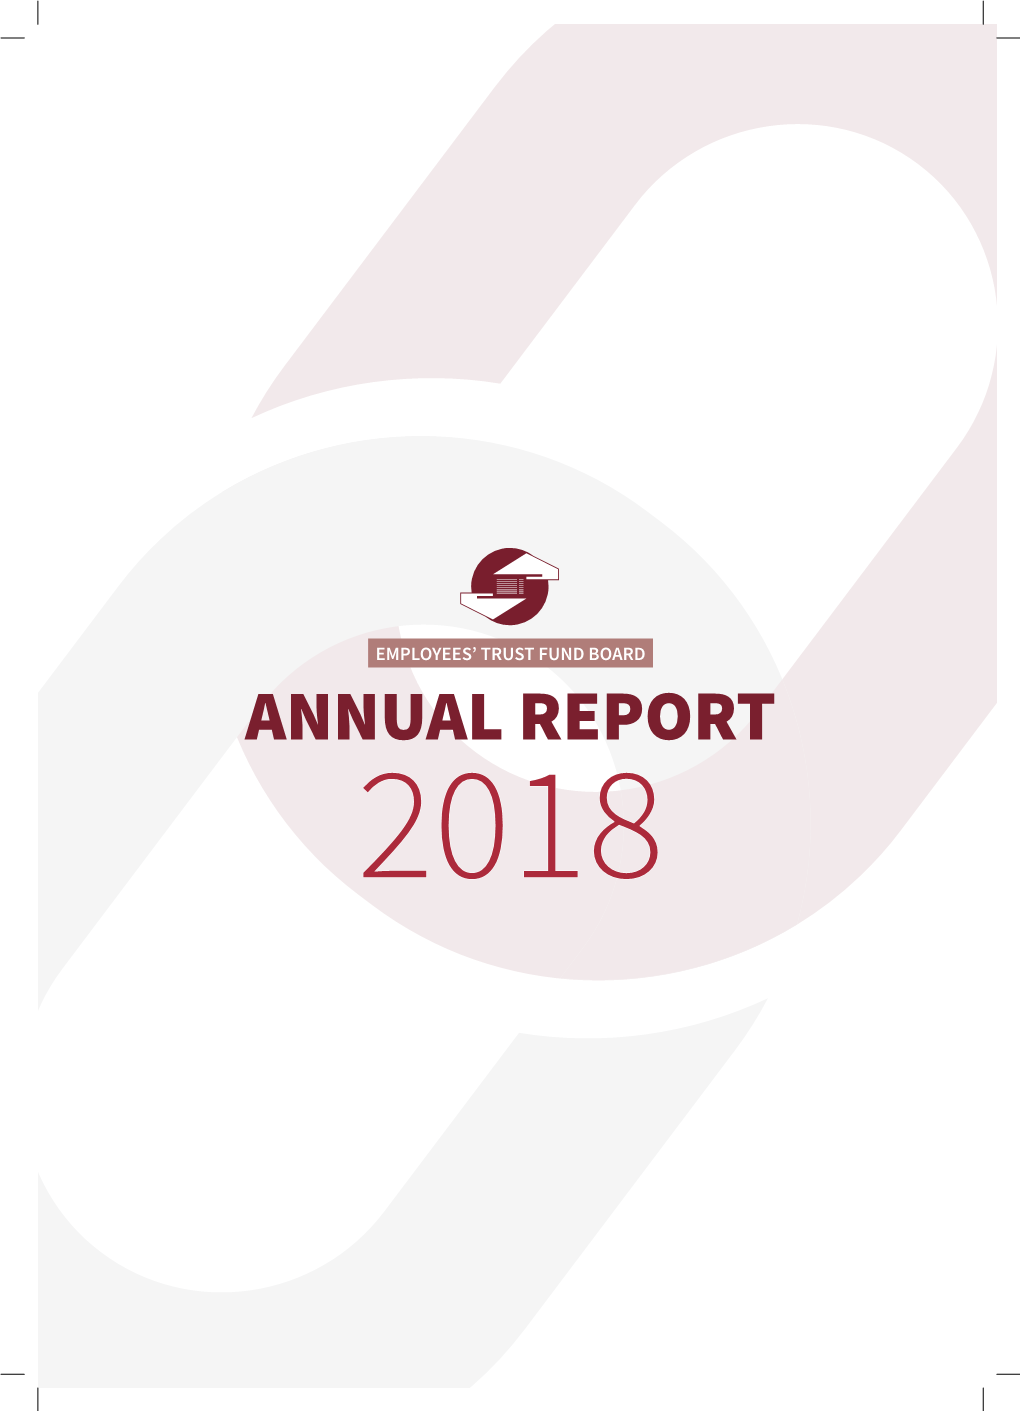 Annual Report 2018 -.:: EMPLOYEES' TRUST FUND BOARD